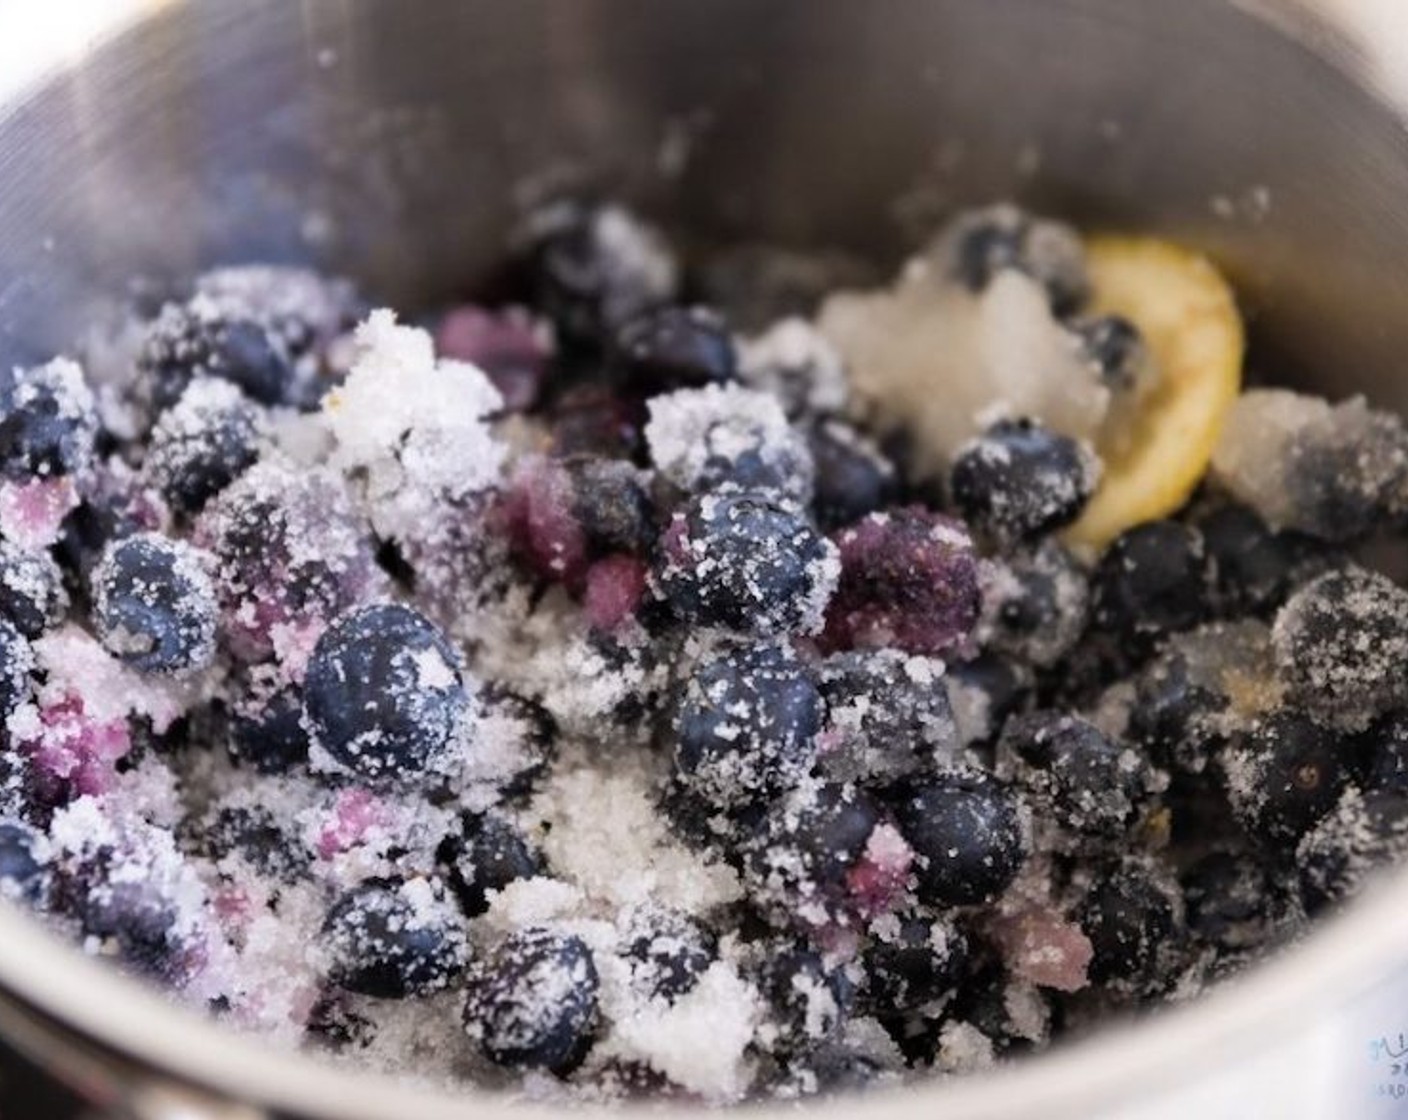 step 1 Add Fresh Blueberries (2 cups), Granulated Sugar (1 cup), 1 Tbsp of Lemon (1), and Ground Fennel (1/4 tsp) to a saucepan.